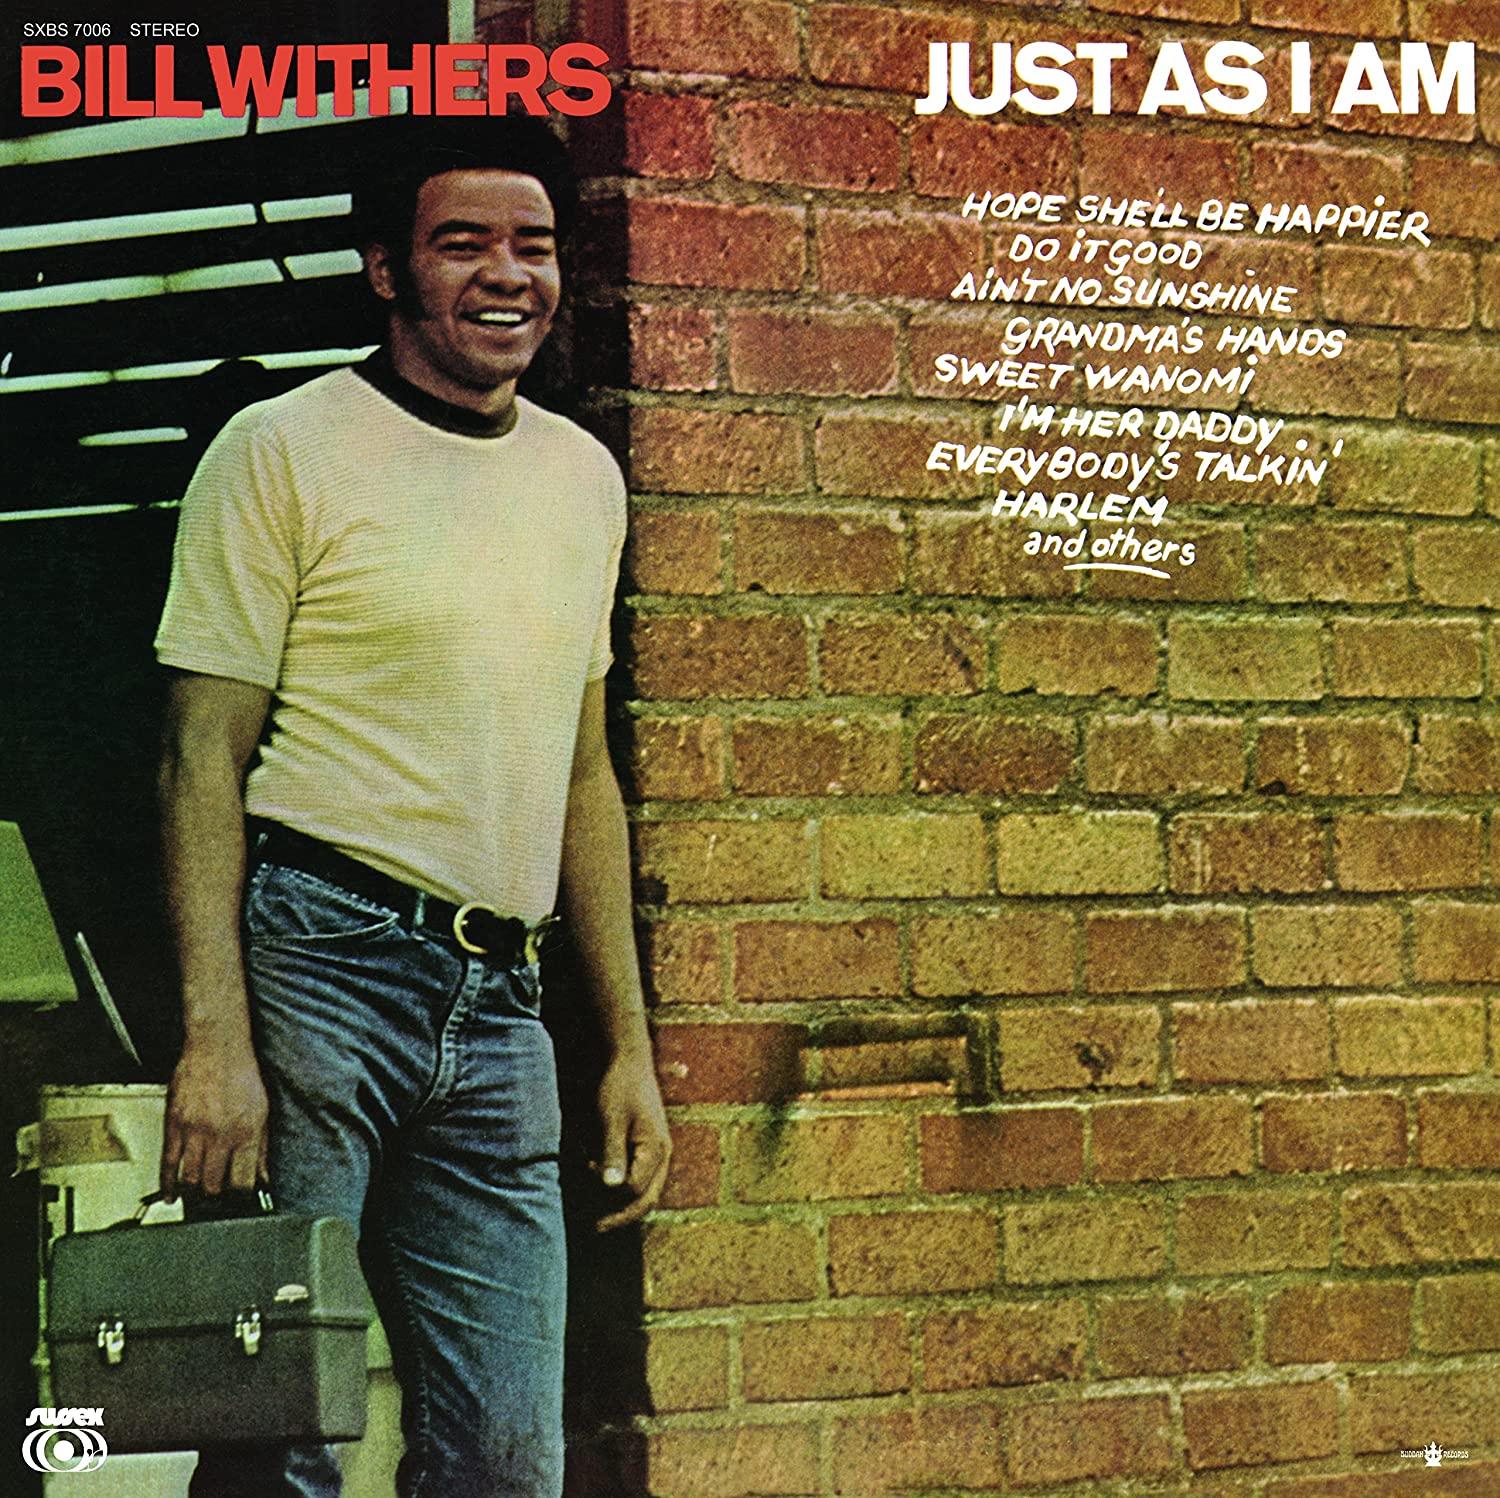 Bill Withers - Just As I Am (Remastered, 180 Gram) (LP) - Joco Records